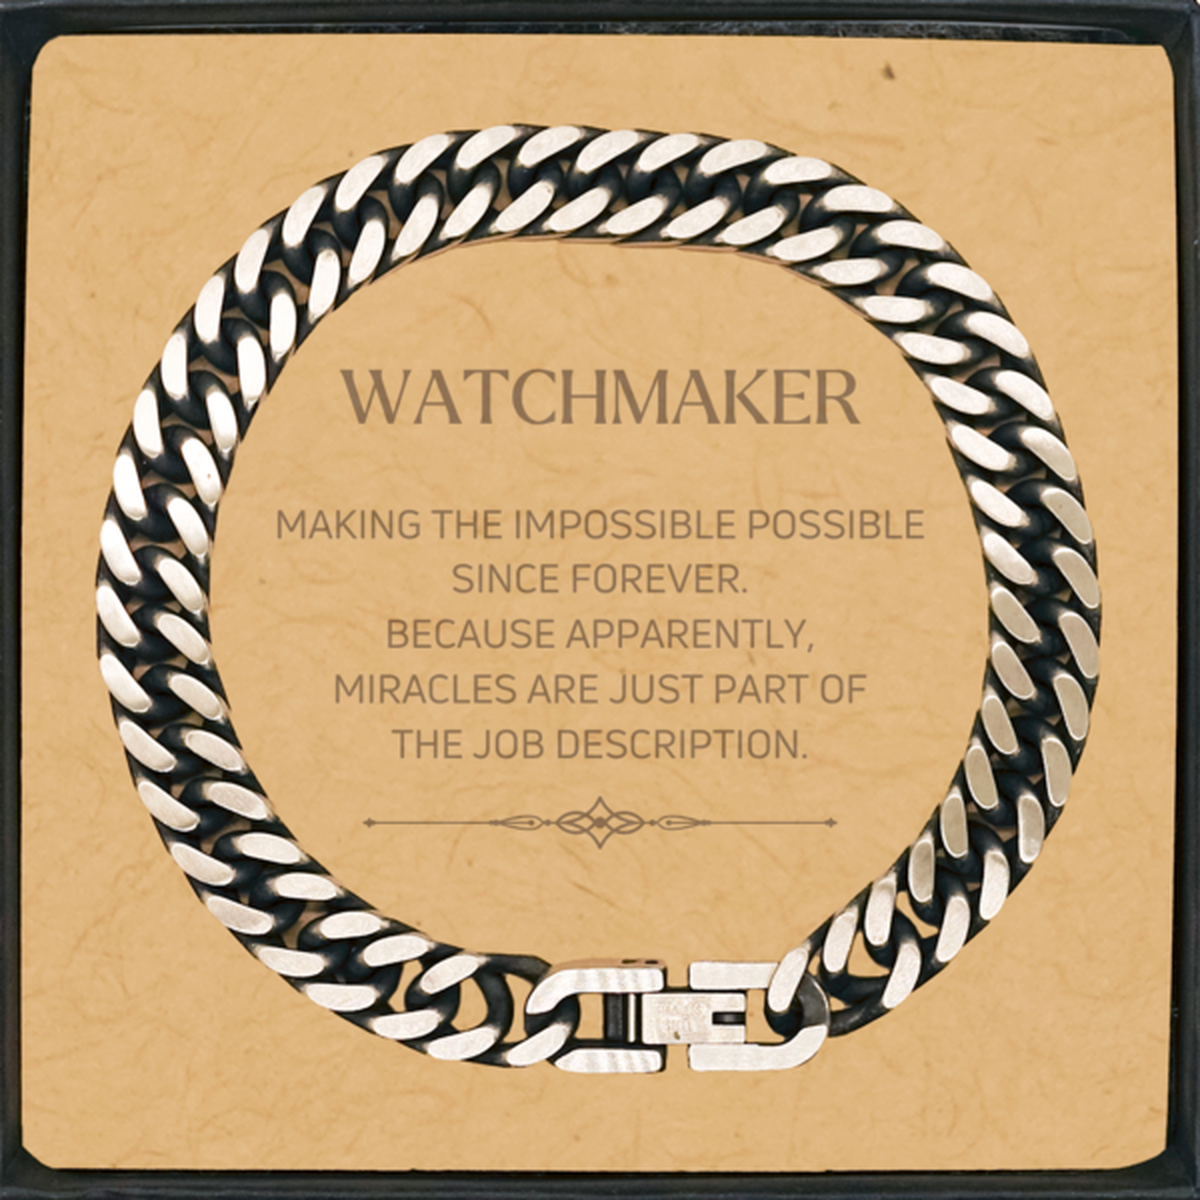 Funny Watchmaker Gifts, Miracles are just part of the job description, Inspirational Birthday Cuban Link Chain Bracelet For Watchmaker, Men, Women, Coworkers, Friends, Boss